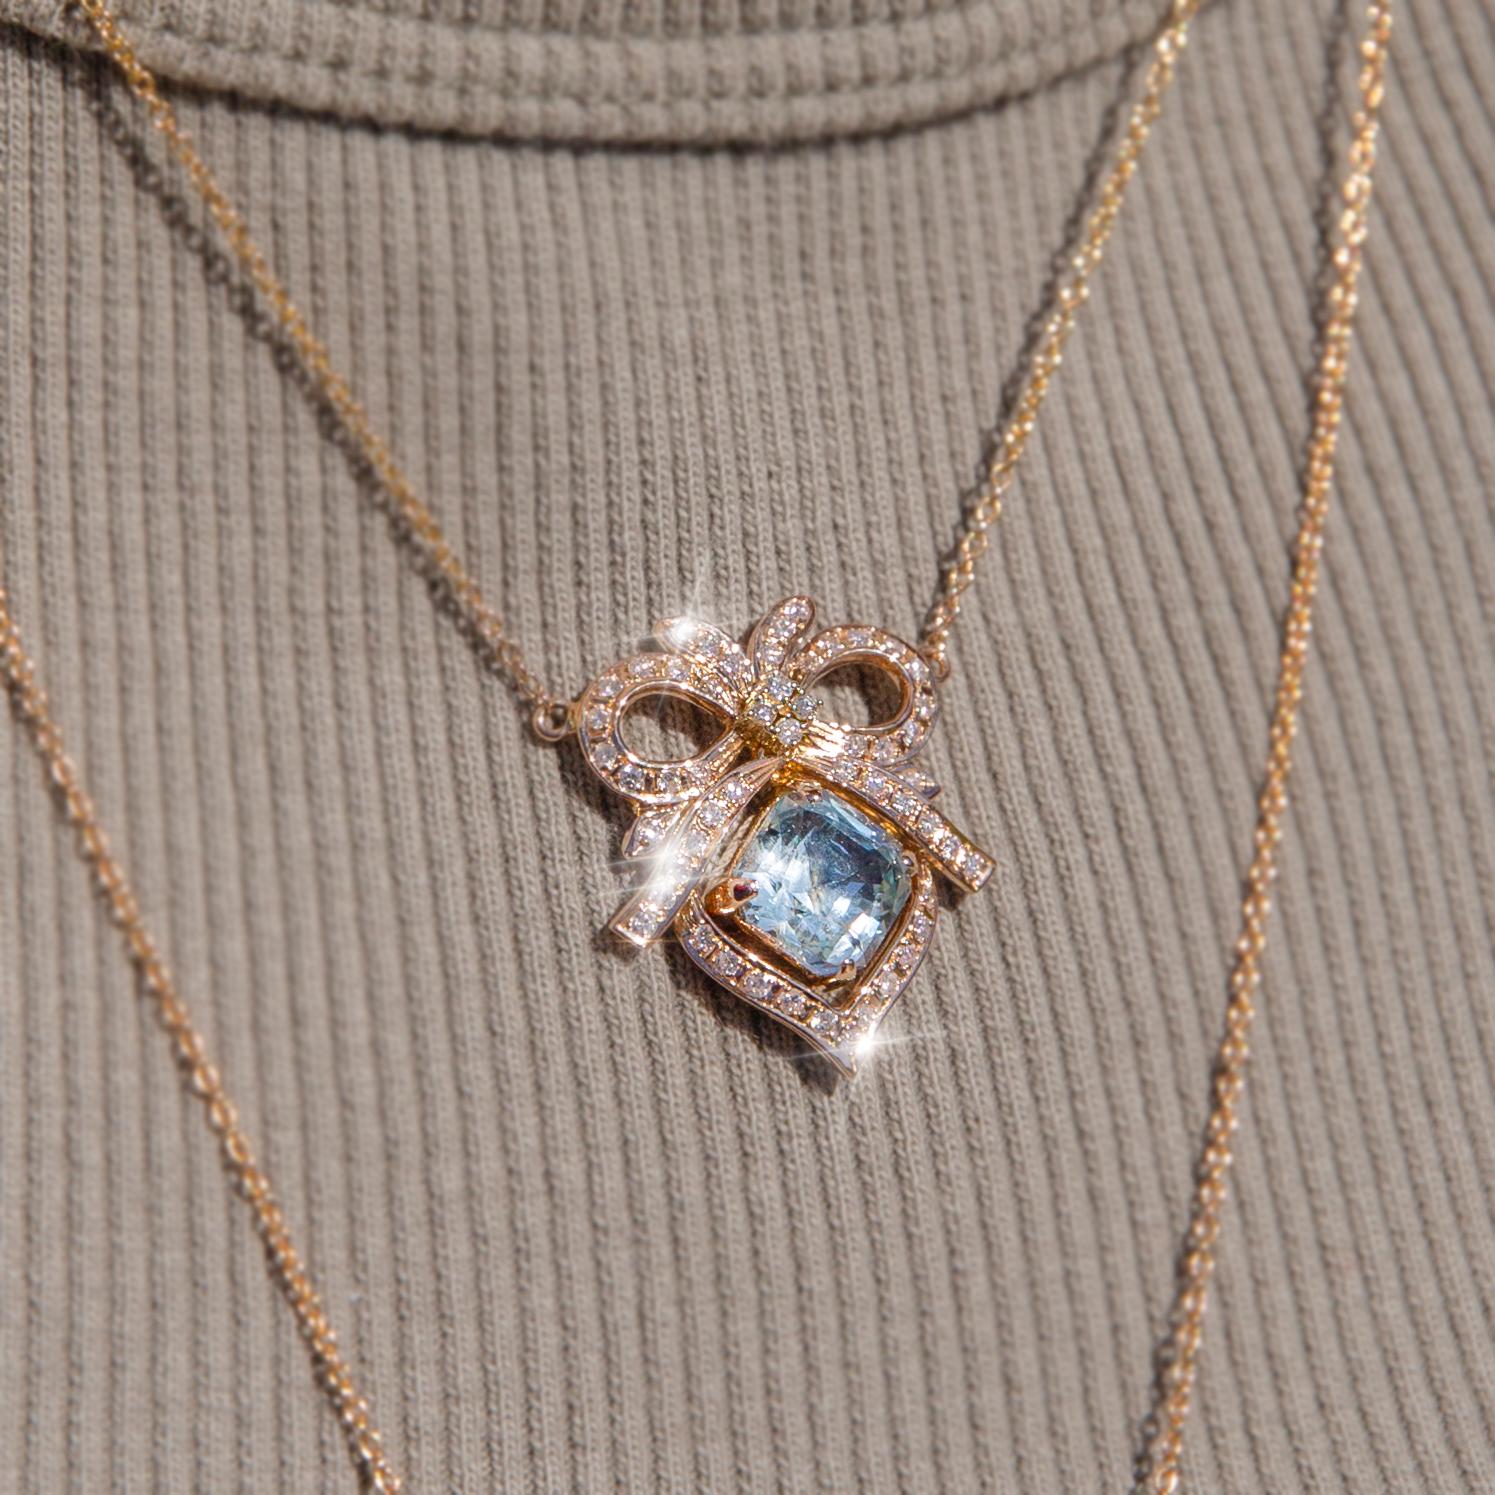 Lovingly crafted from a 1960s necklace is this reinvented jewel made with an enchanting light blue emerald cut aquamarine resting in a gorgeous 14 carat gold bow adorned with fifty-three round brilliant cut diamonds attached to a 9 carat gold